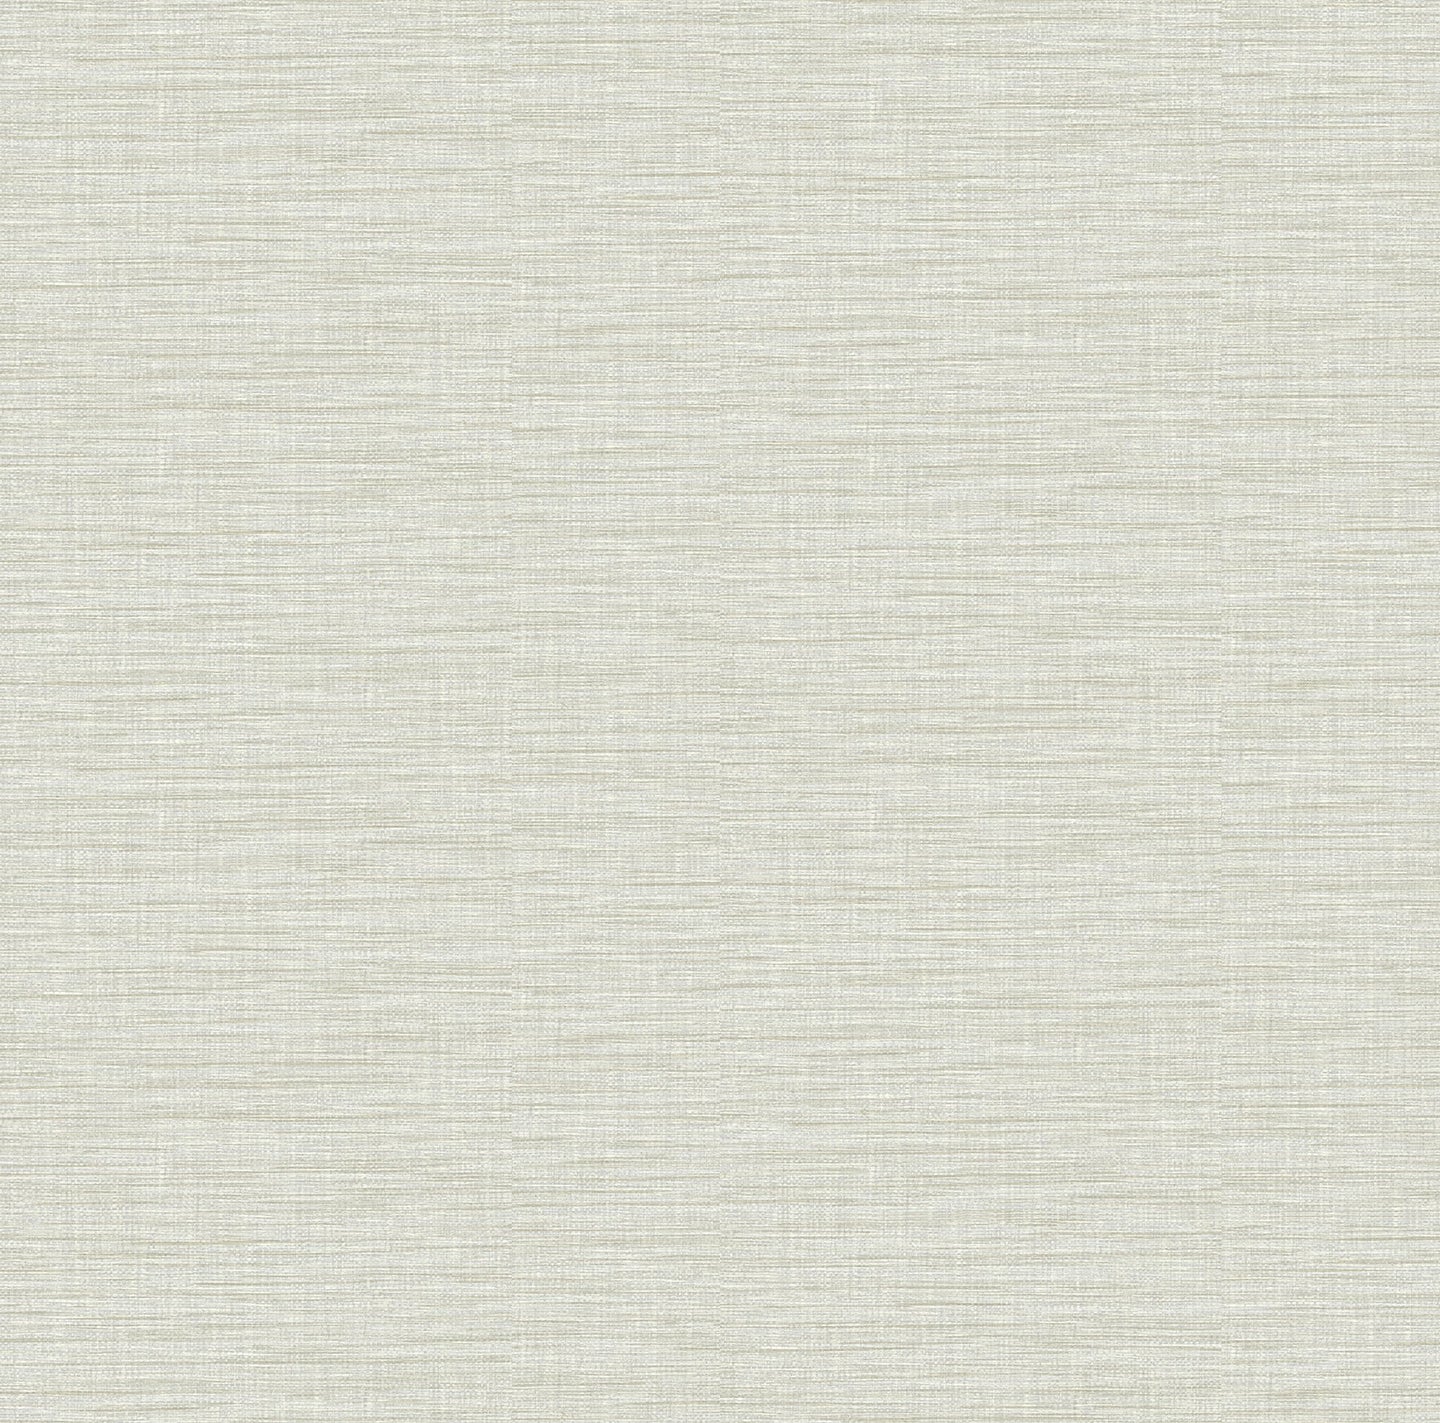 Neutral hues are infused with soft dimension in this faux linen wallpaper. A delicate blend of light greys and white are g...